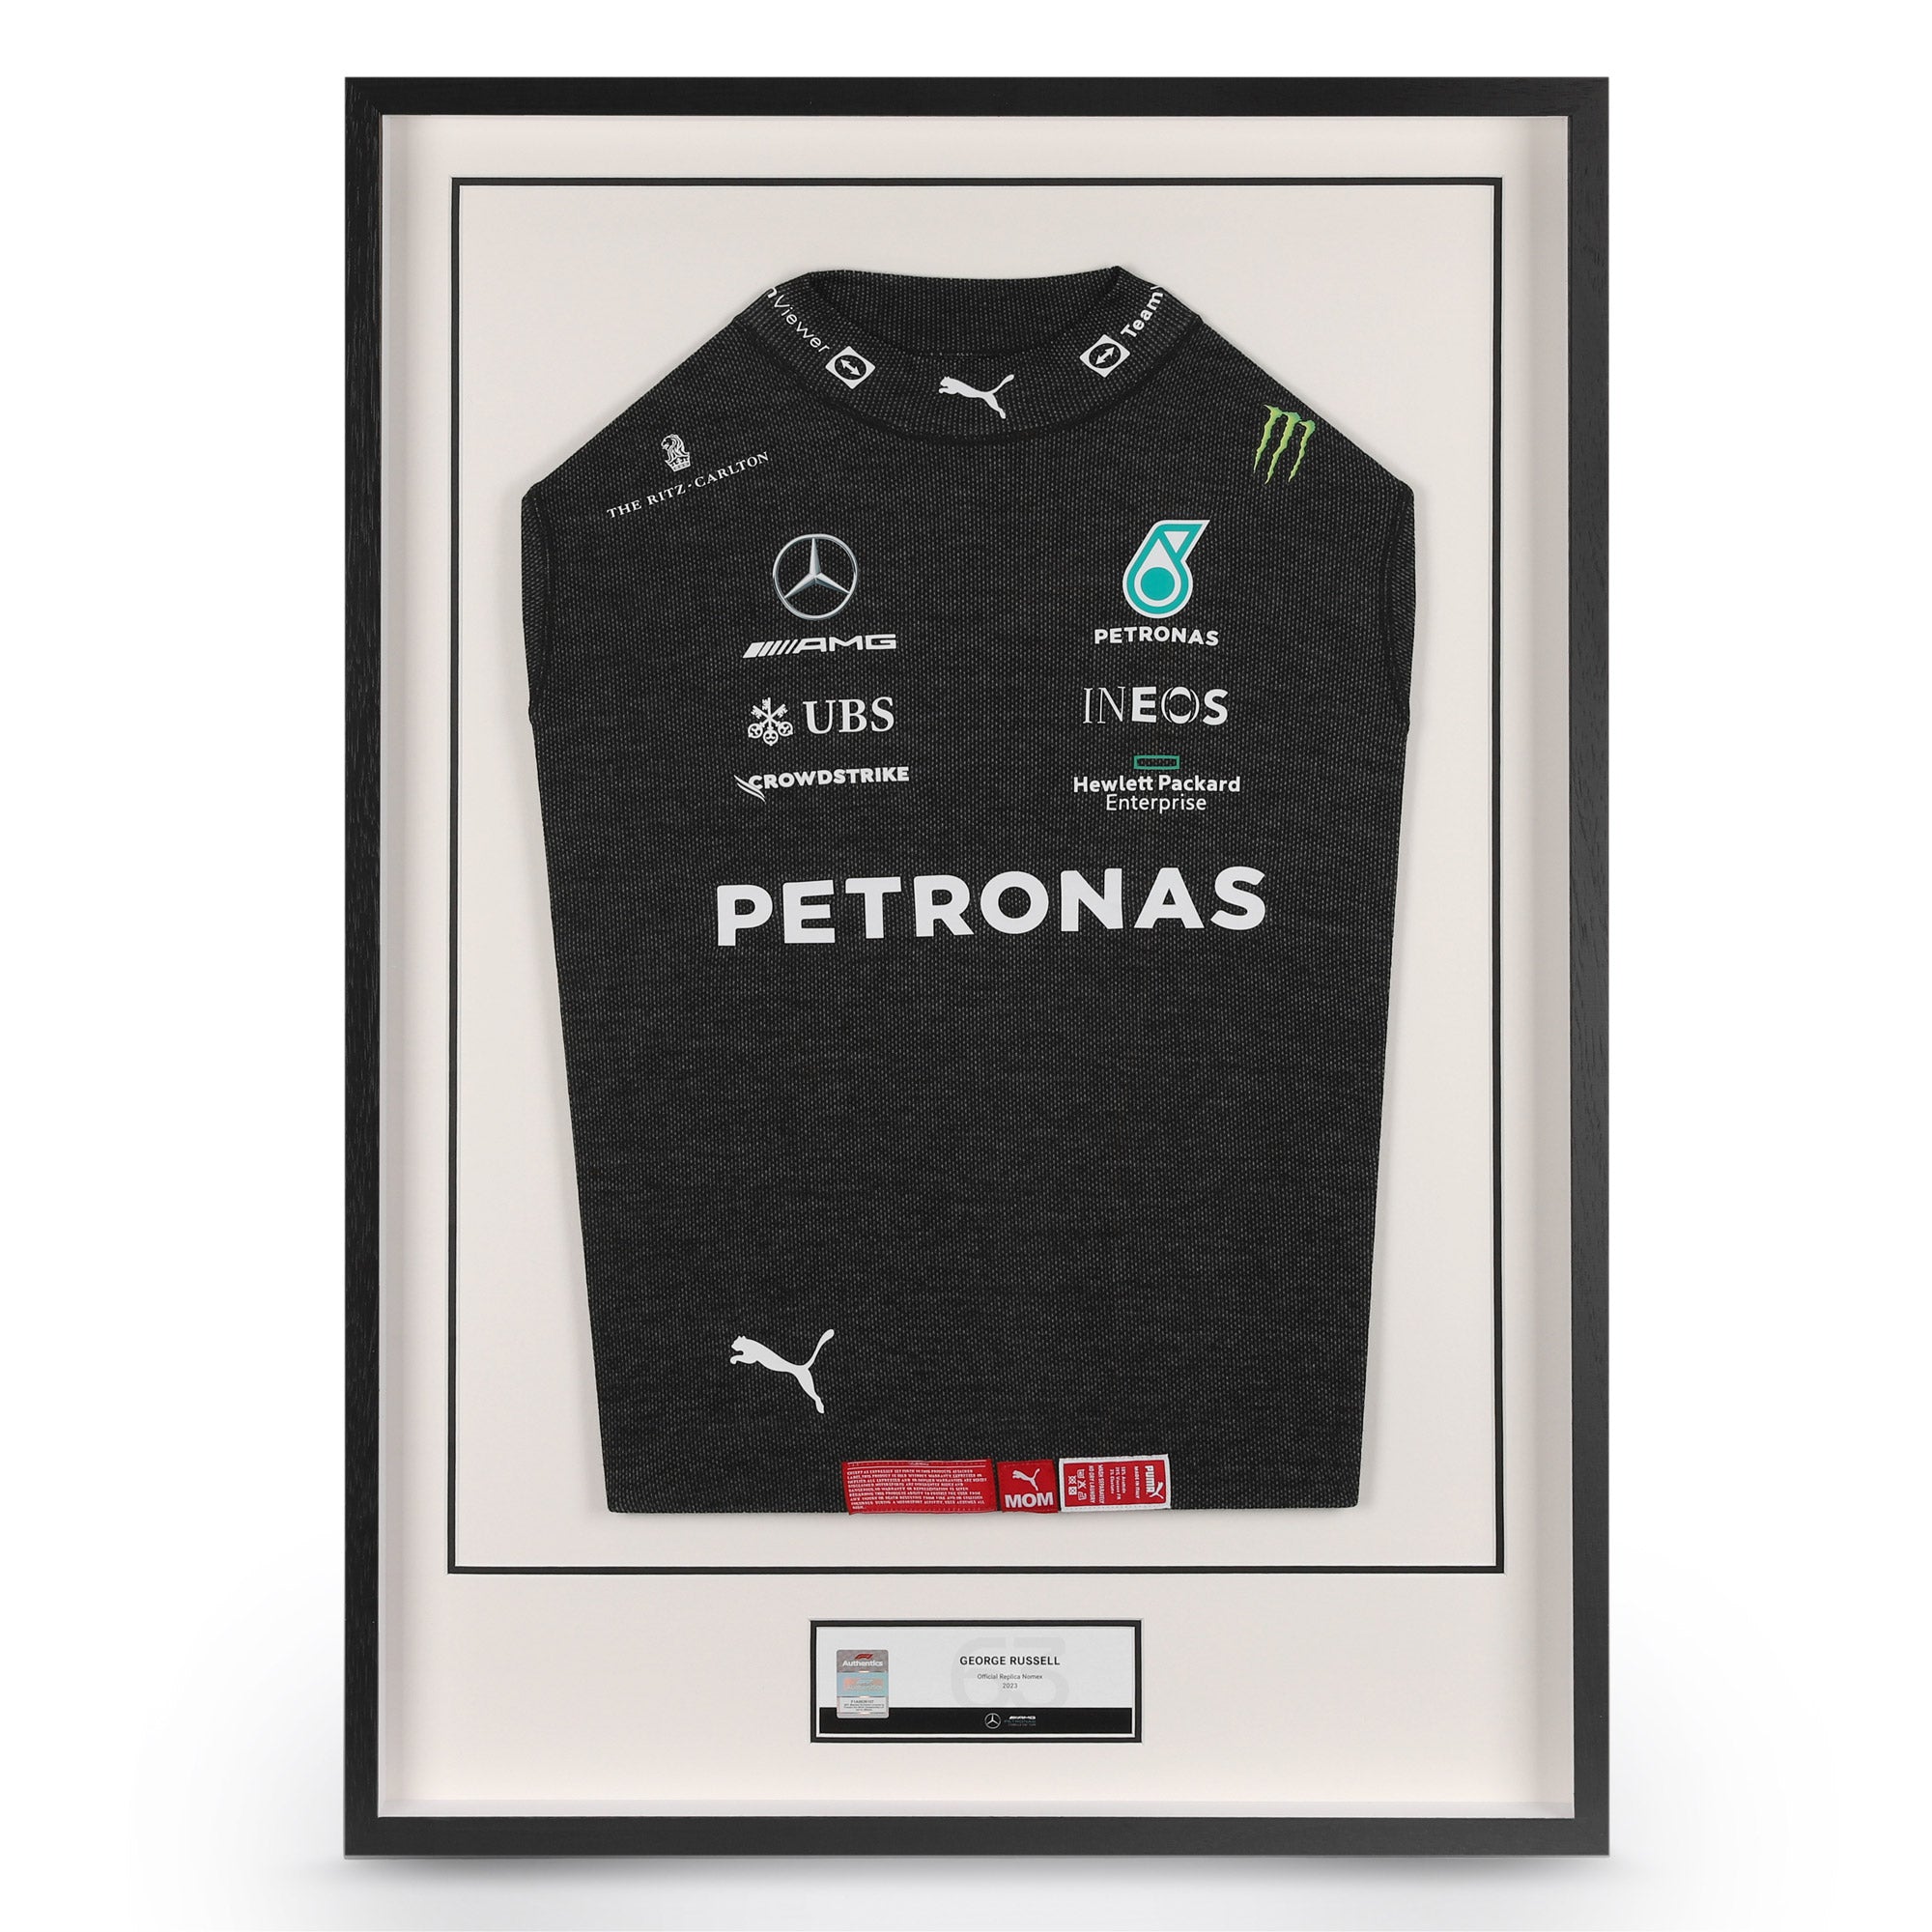 Officially Licensed 2023 Mercedes-AMG Petronas F1 Team Nomex Top - George Russell Edition